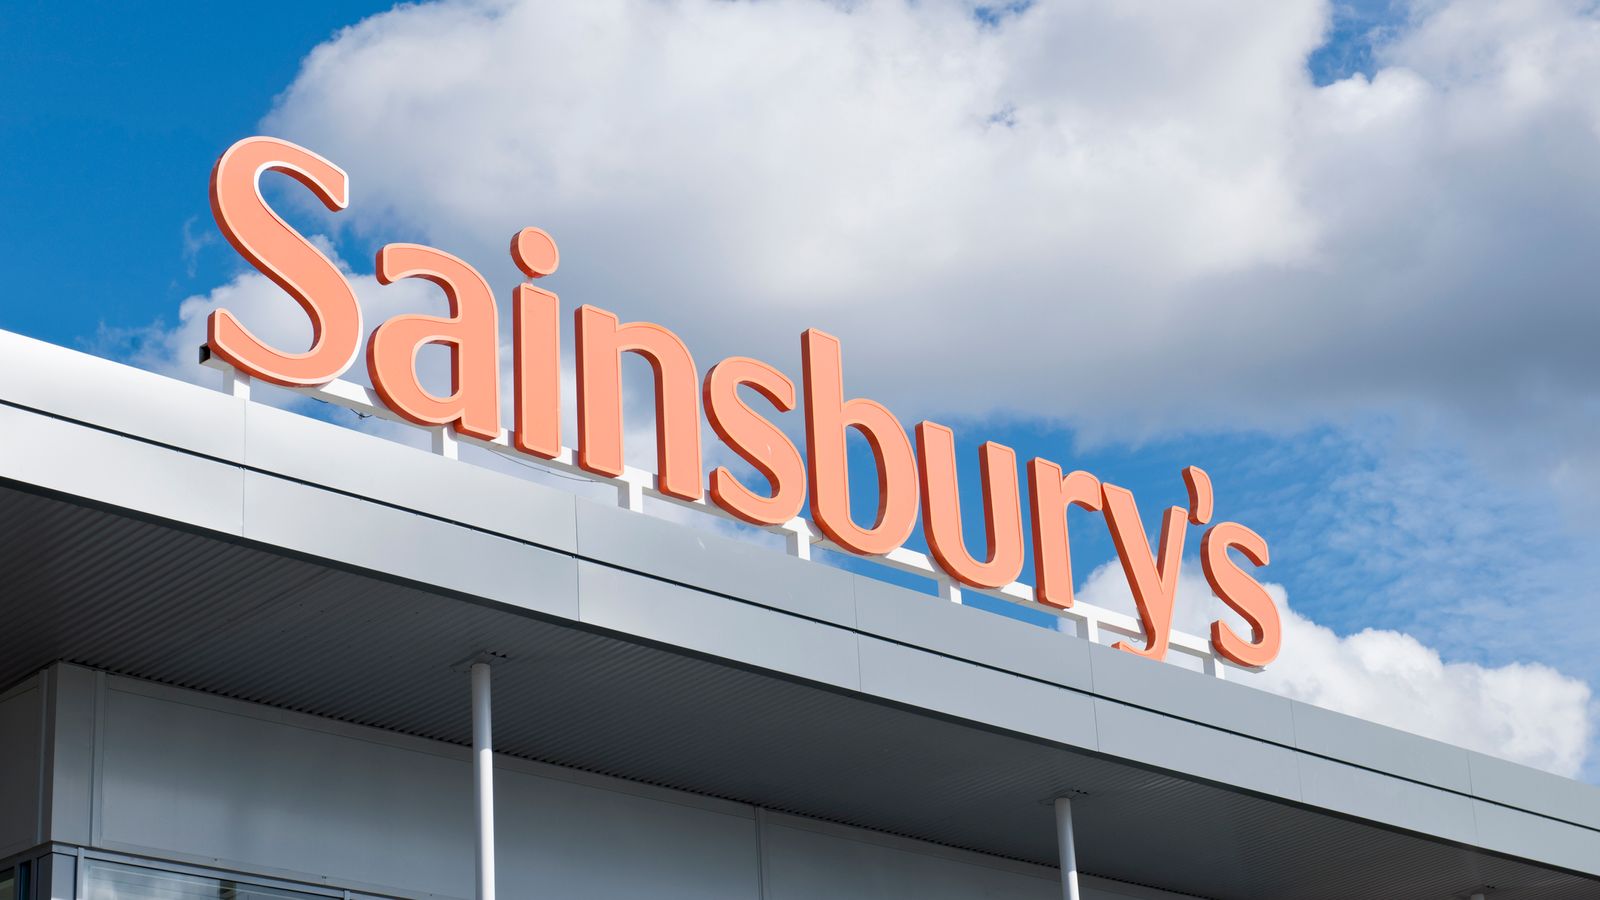 Sainsbury's sees fall in pre-tax profit as it reveals cost of 'keeping prices low' during cost-of-living crisis